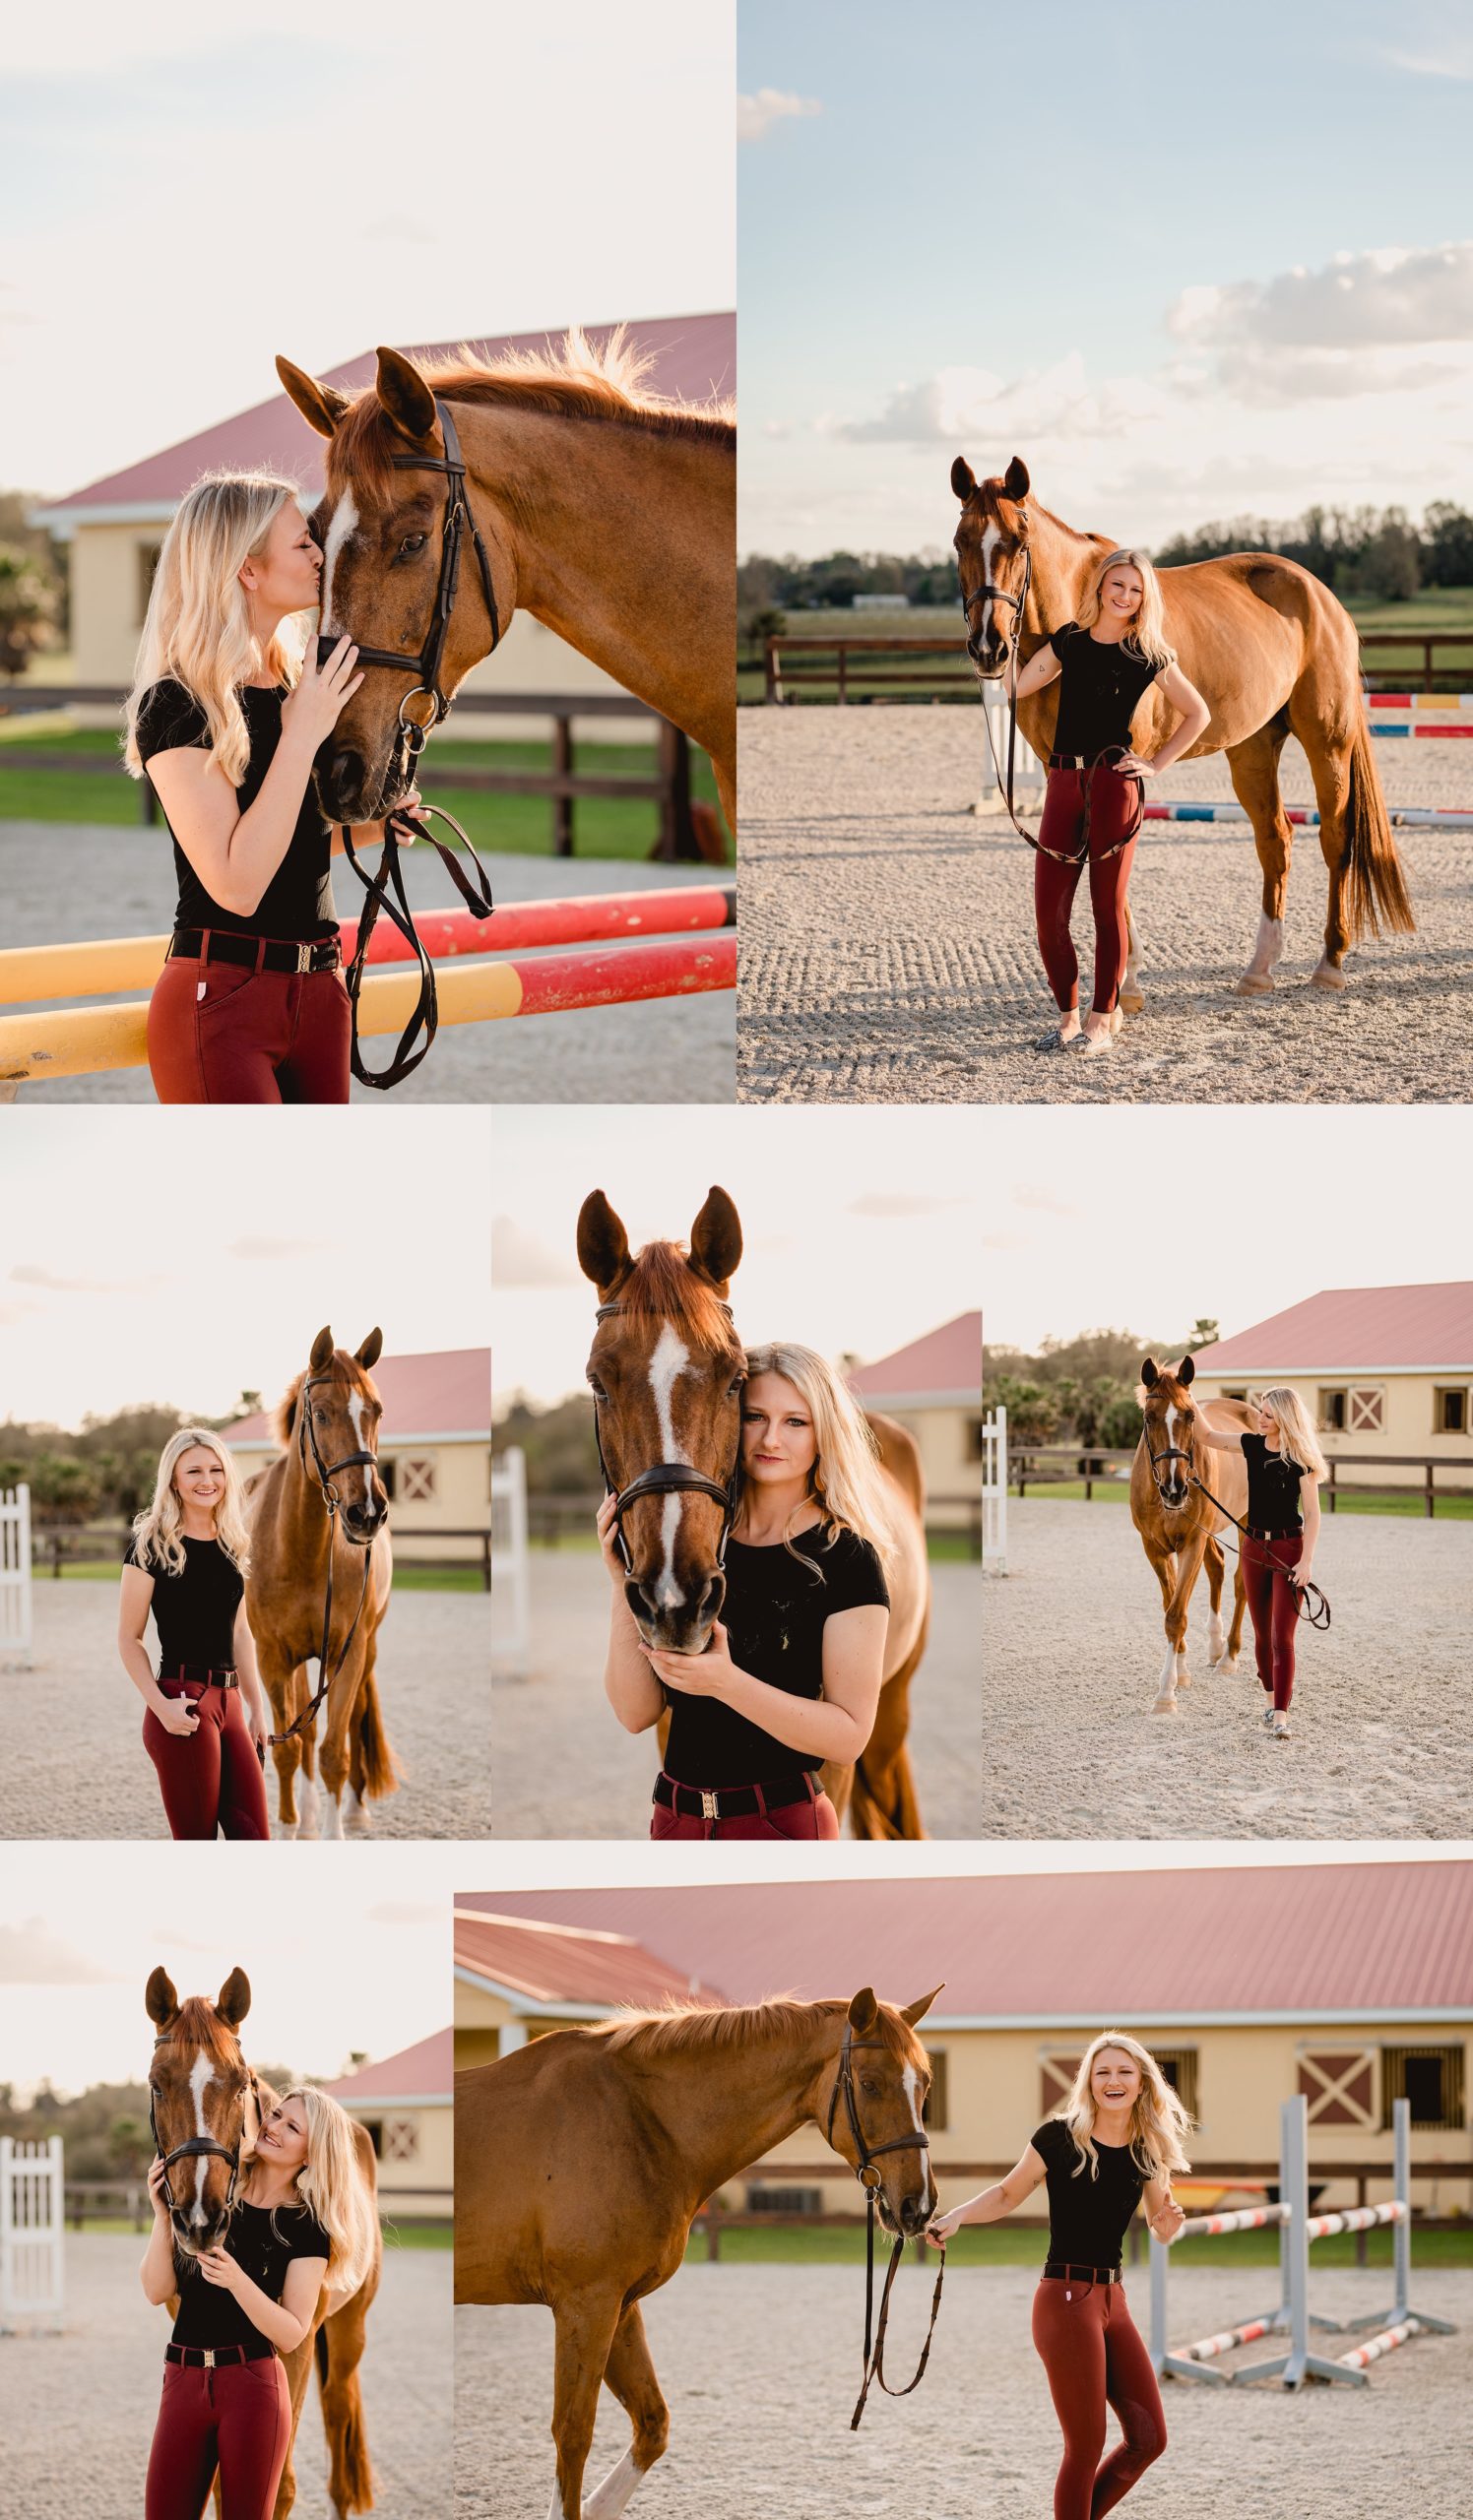 Horse and rider posing ideas in Ocala, FL at horse show barn.